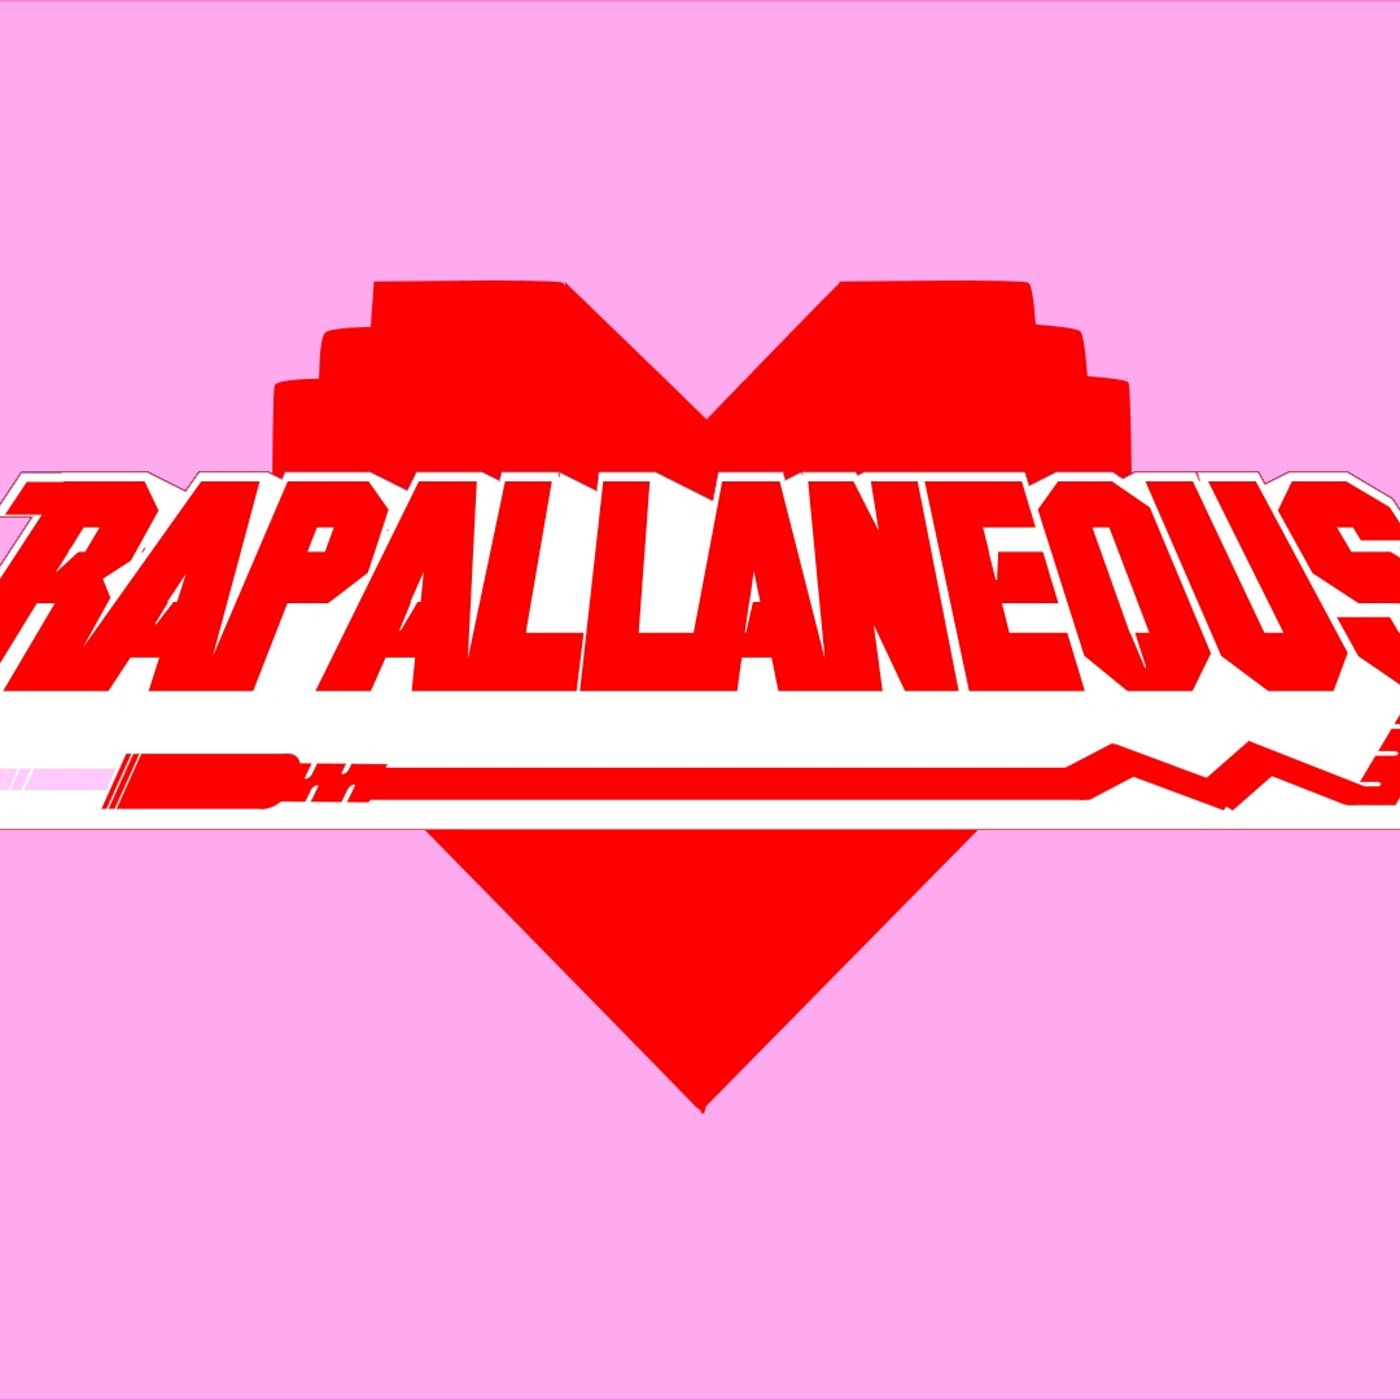 Rapallaneous 54 (The 2nd annual Hip-Hop Love Songs episode)